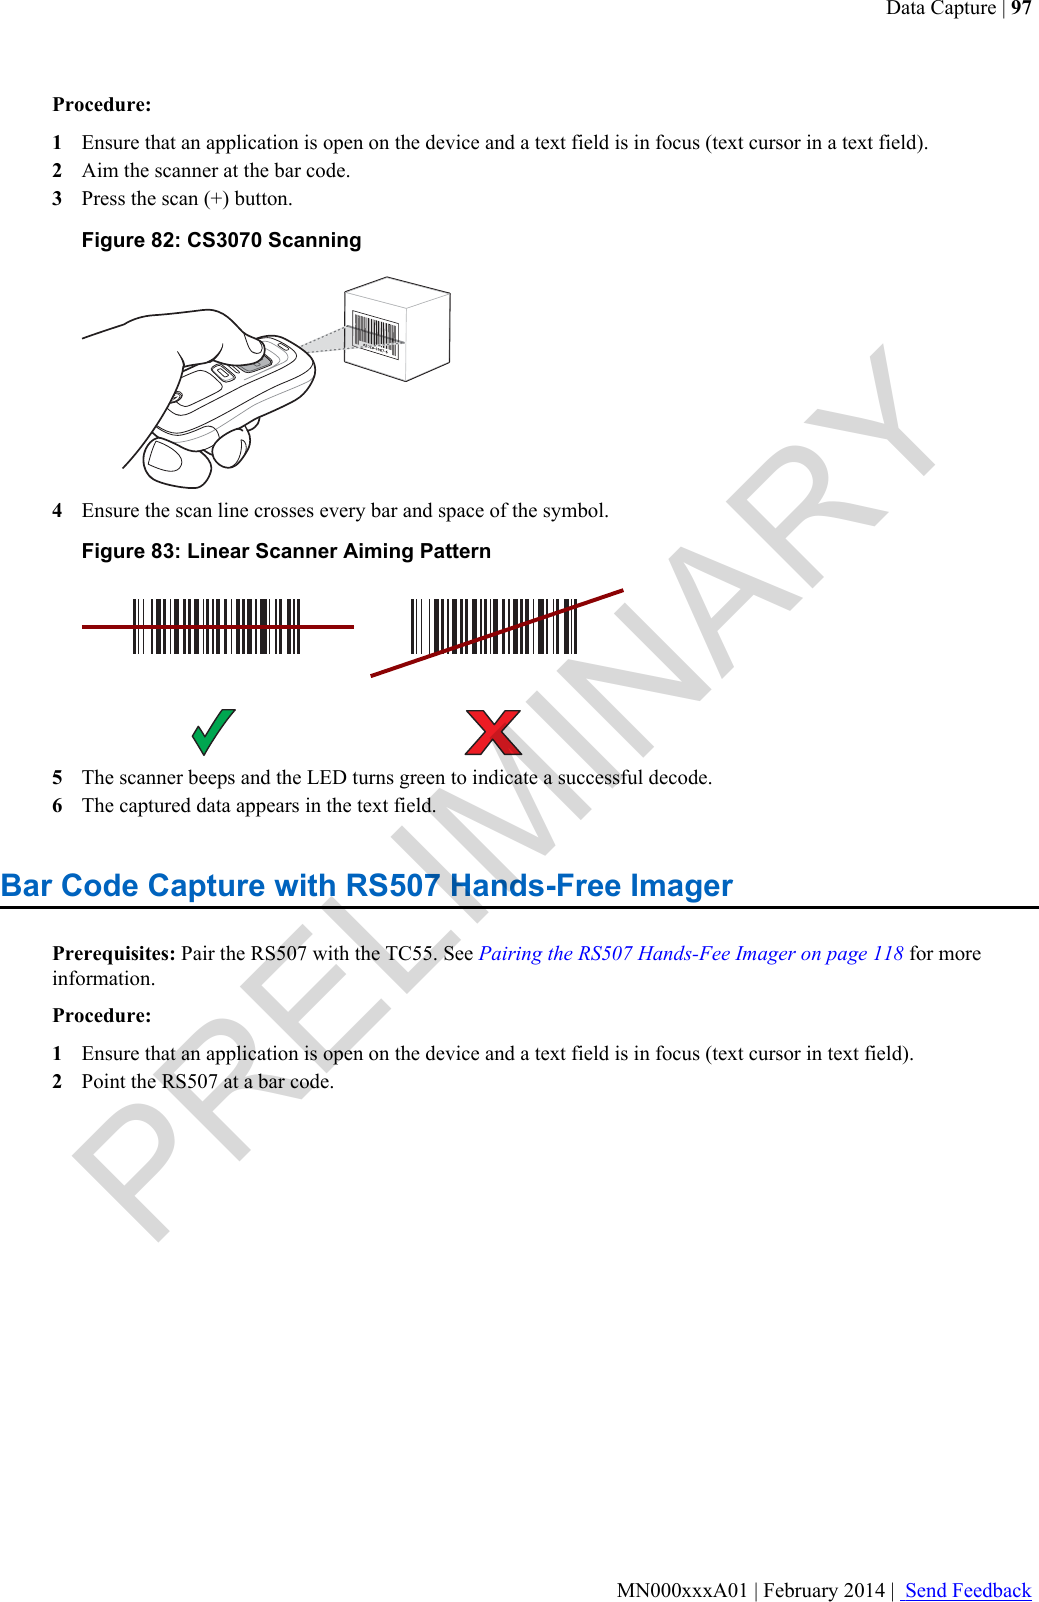 Procedure:1Ensure that an application is open on the device and a text field is in focus (text cursor in a text field).2Aim the scanner at the bar code.3Press the scan (+) button.Figure 82: CS3070 Scanning4Ensure the scan line crosses every bar and space of the symbol.Figure 83: Linear Scanner Aiming Pattern5The scanner beeps and the LED turns green to indicate a successful decode.6The captured data appears in the text field.Bar Code Capture with RS507 Hands-Free ImagerPrerequisites: Pair the RS507 with the TC55. See Pairing the RS507 Hands-Fee Imager on page 118 for moreinformation.Procedure:1Ensure that an application is open on the device and a text field is in focus (text cursor in text field).2Point the RS507 at a bar code.Data Capture | 97MN000xxxA01 | February 2014 |  Send FeedbackPRELIMINARY